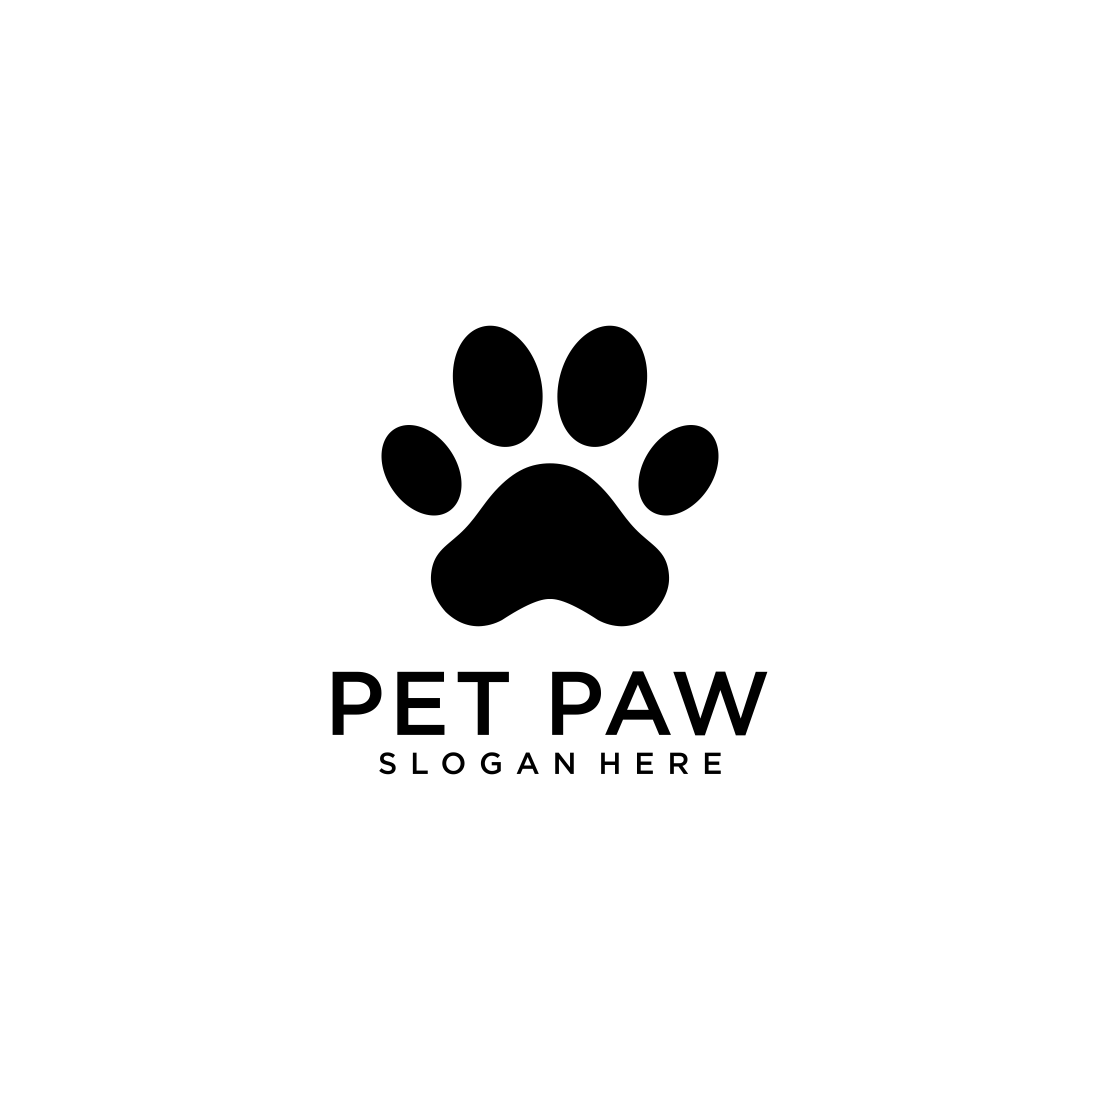 silhouette of dog paws logo vector cover image.